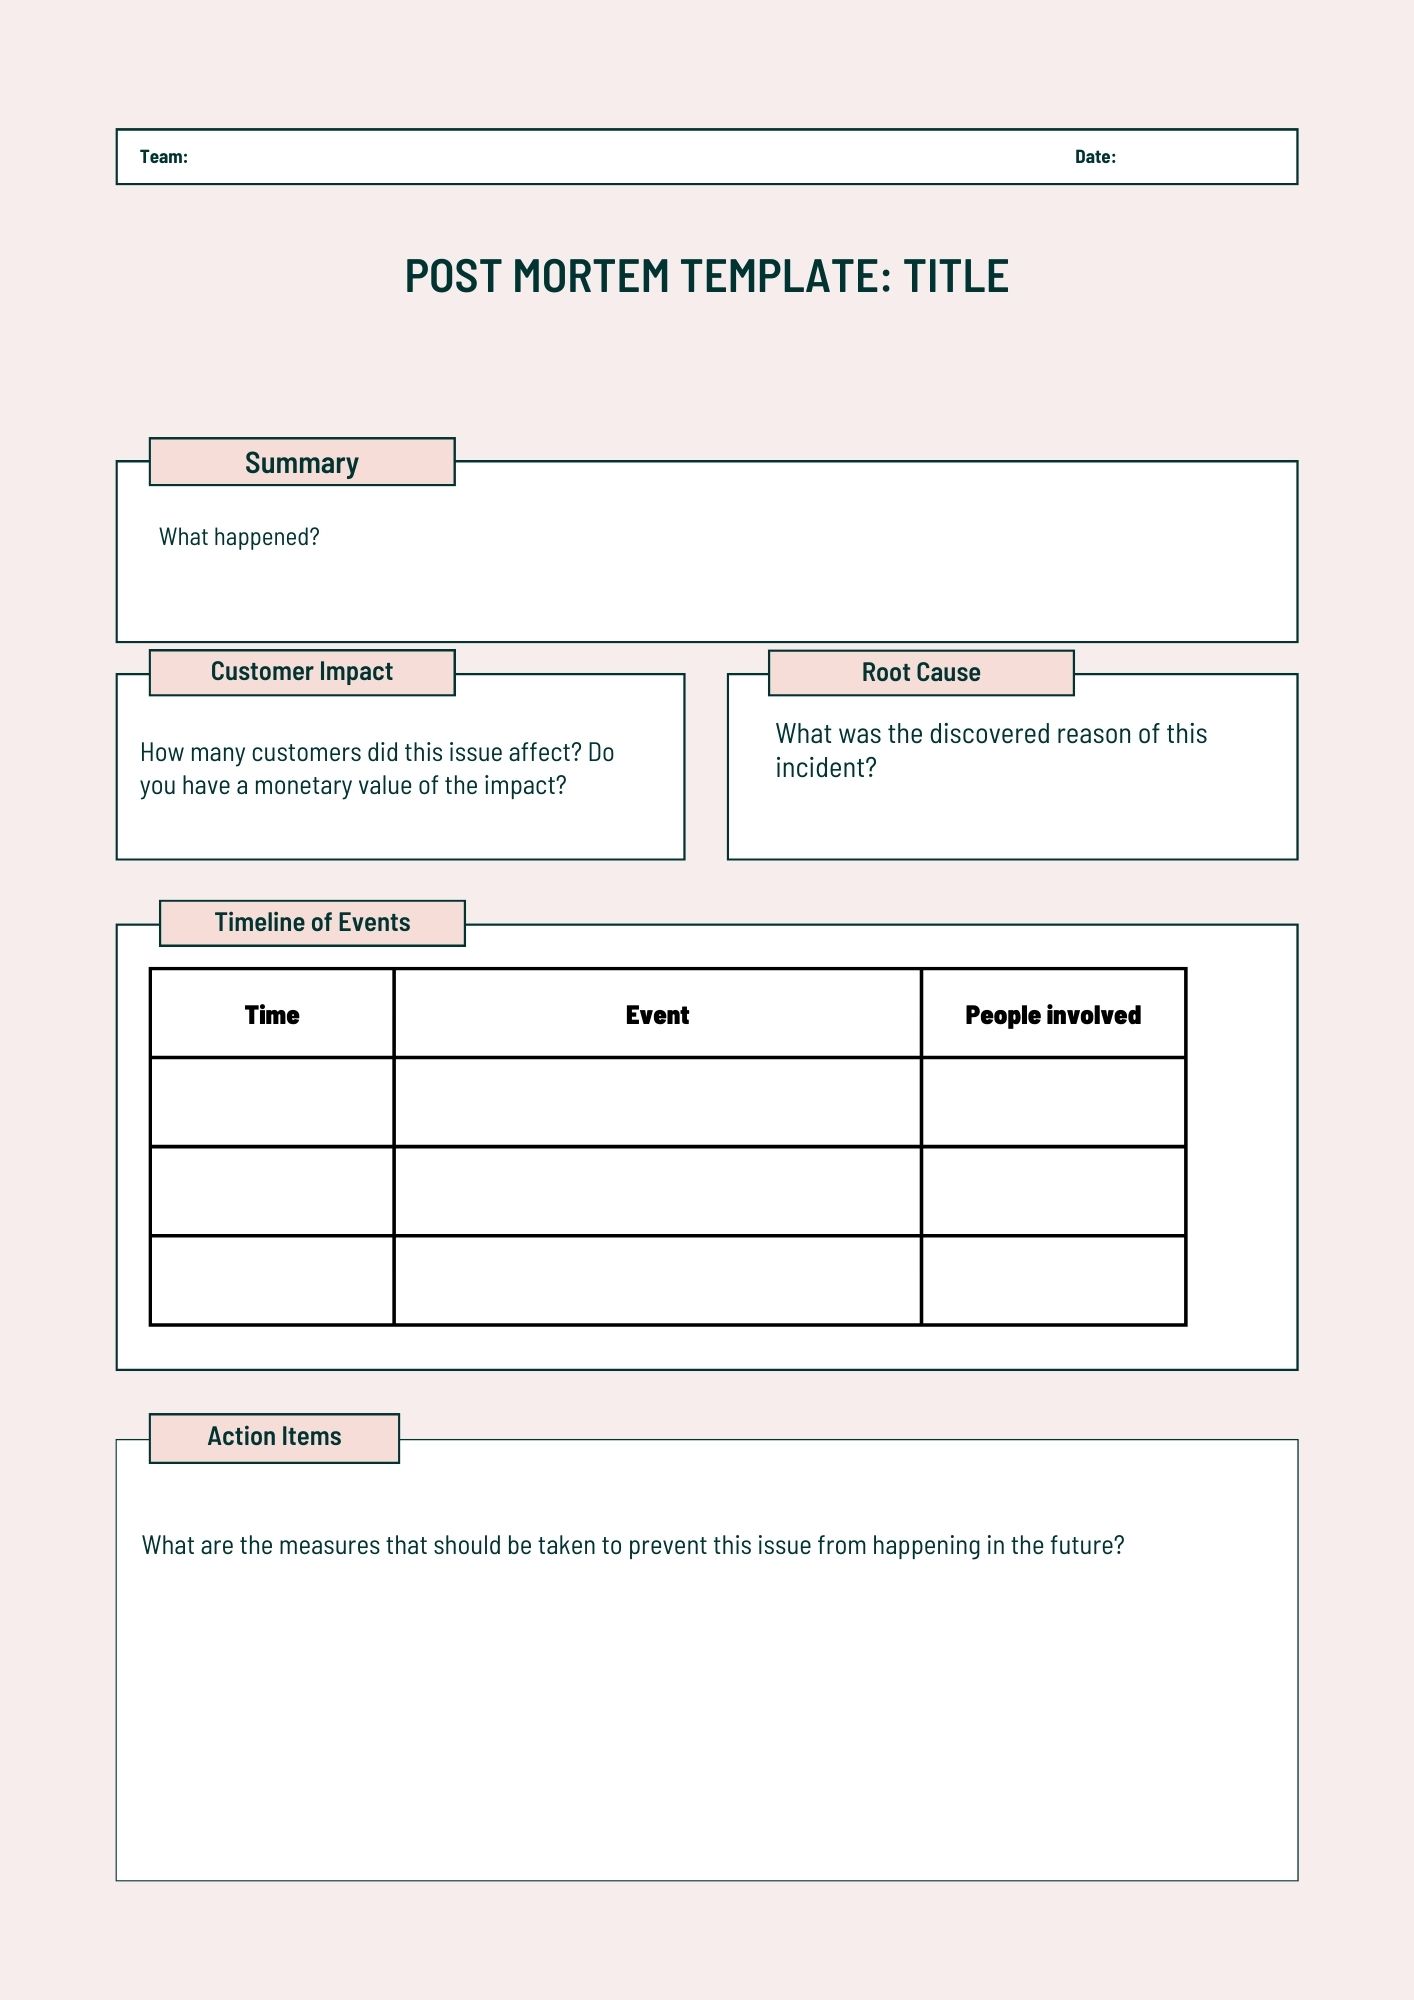 Post-mortem Template Example